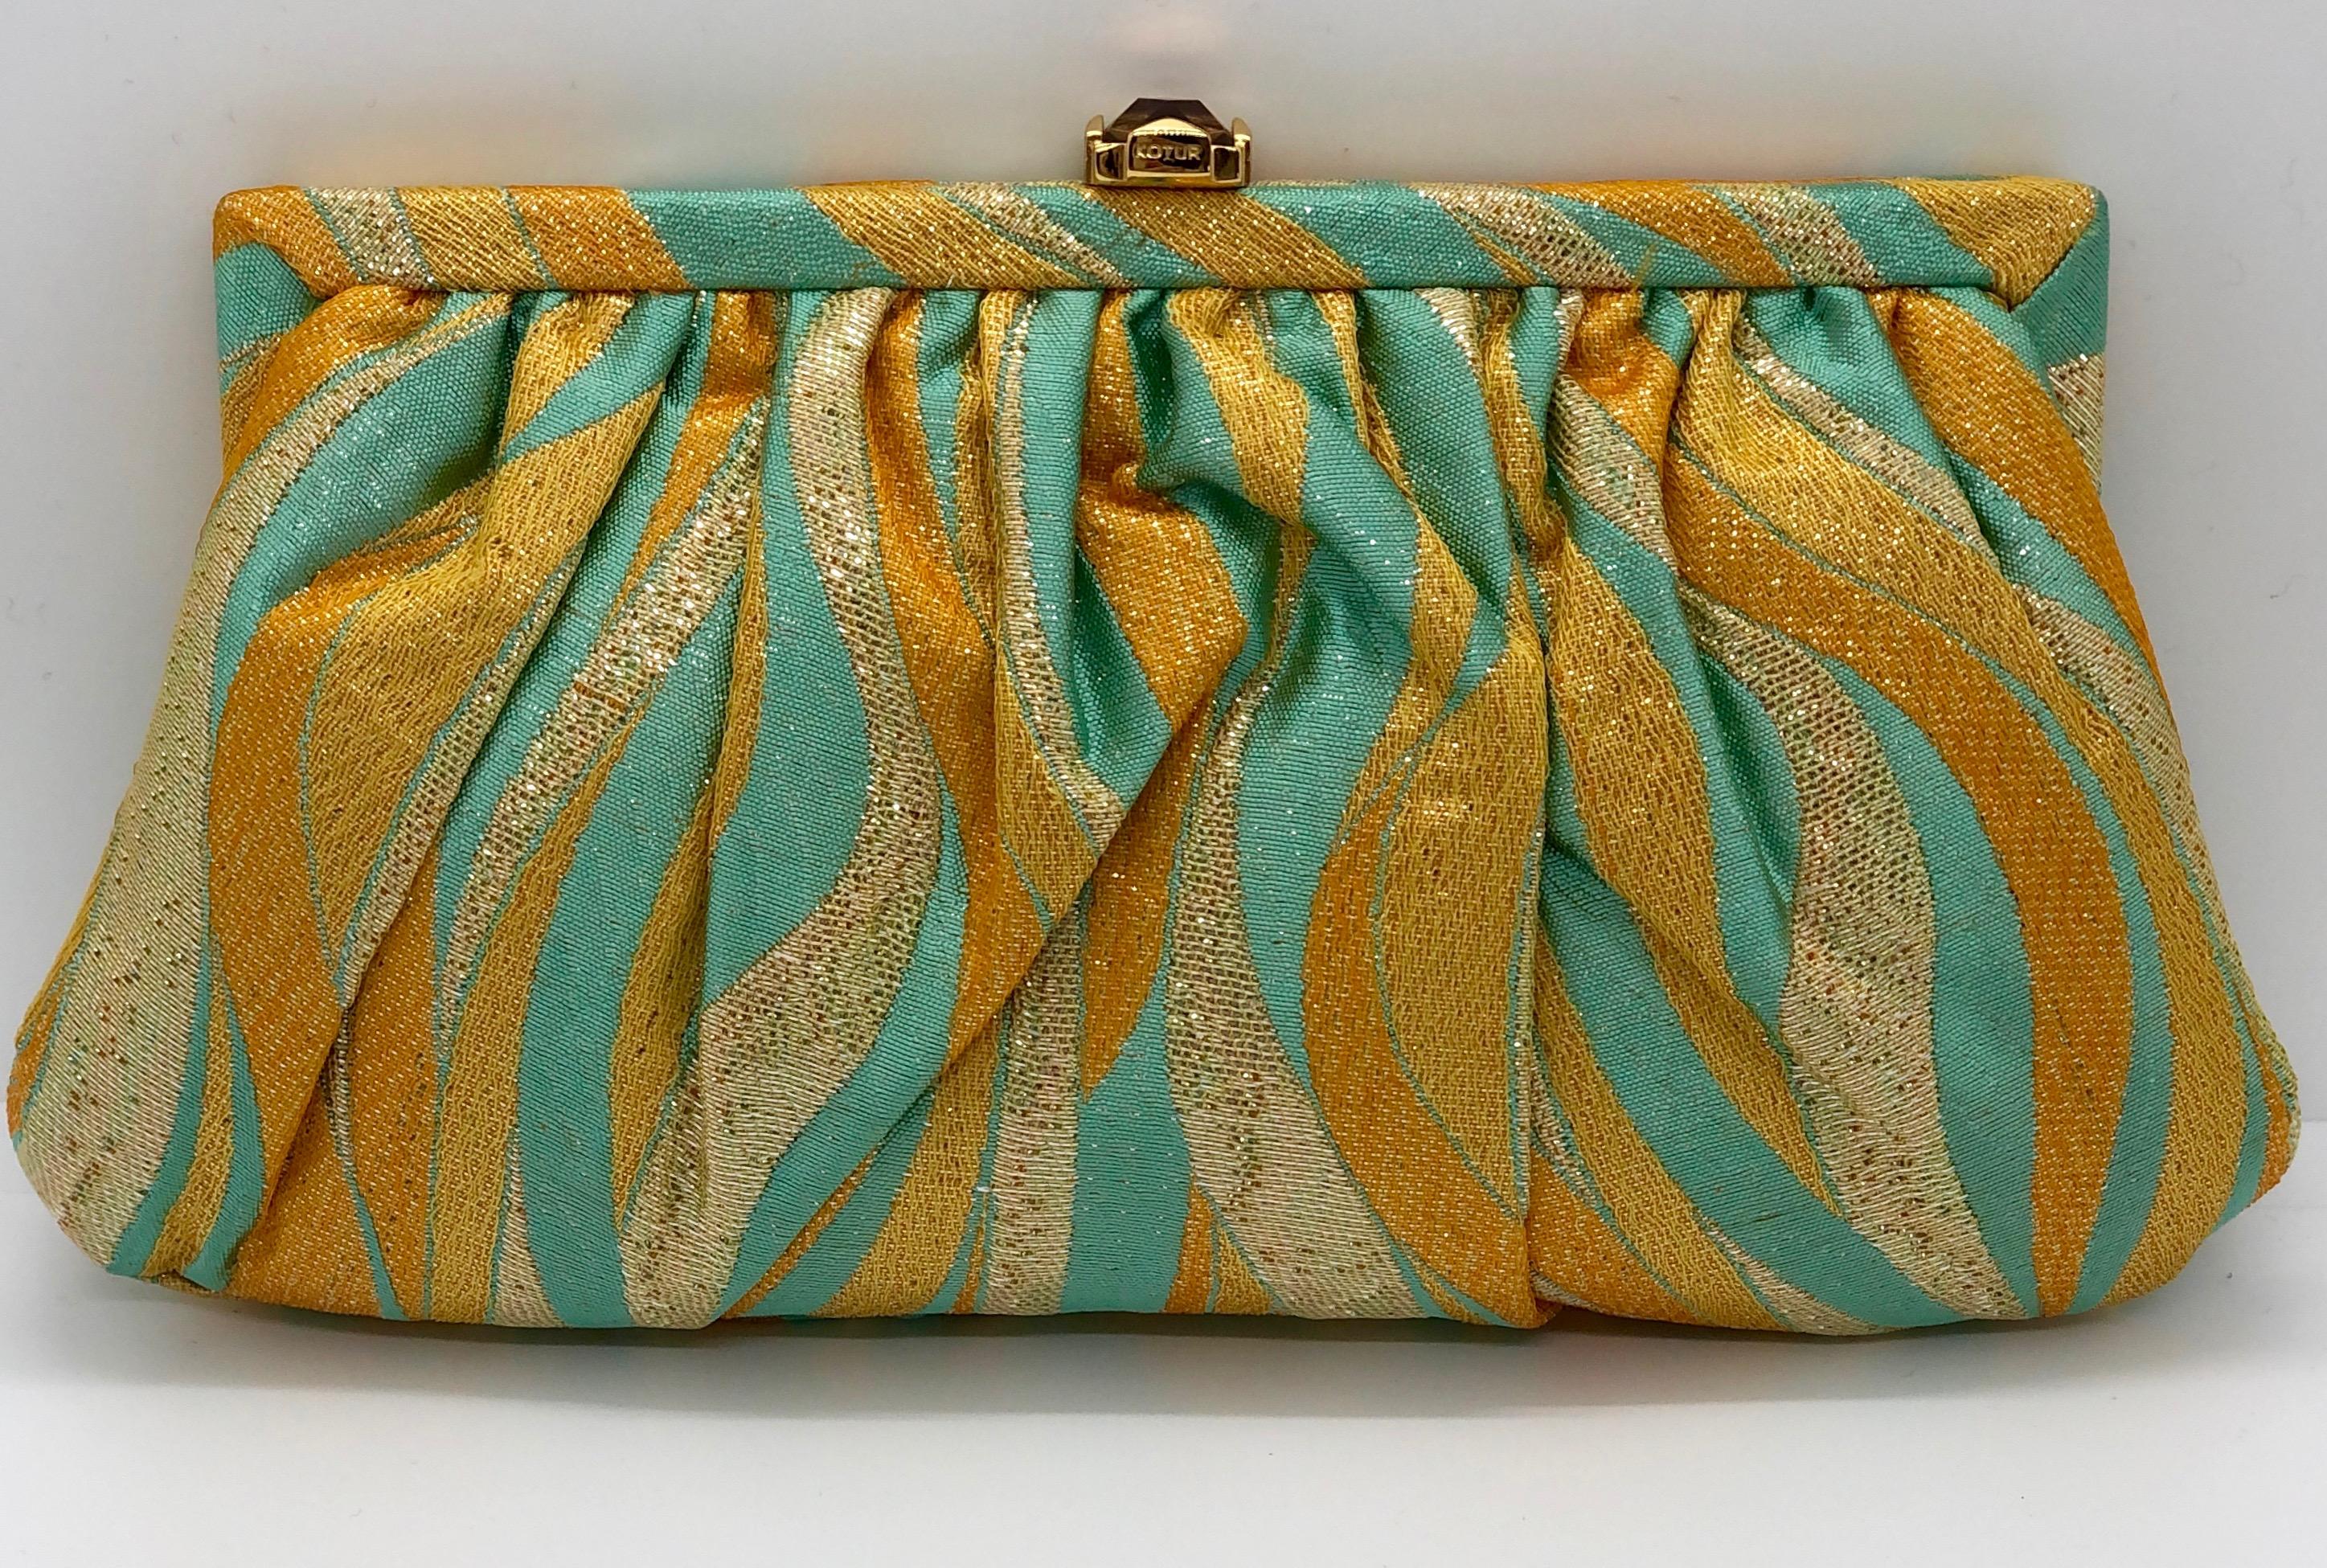 Manufacture:  Fiona Kotur
Place of Manufacture:  Hong Kong
Type:  Evening clutch with shoulder chain
Materials:  Metallic silk, cotton and leather interior
Colors:  Metallic corn silk yellow, gold and turquoise
Style:  Vintage silk and cotton